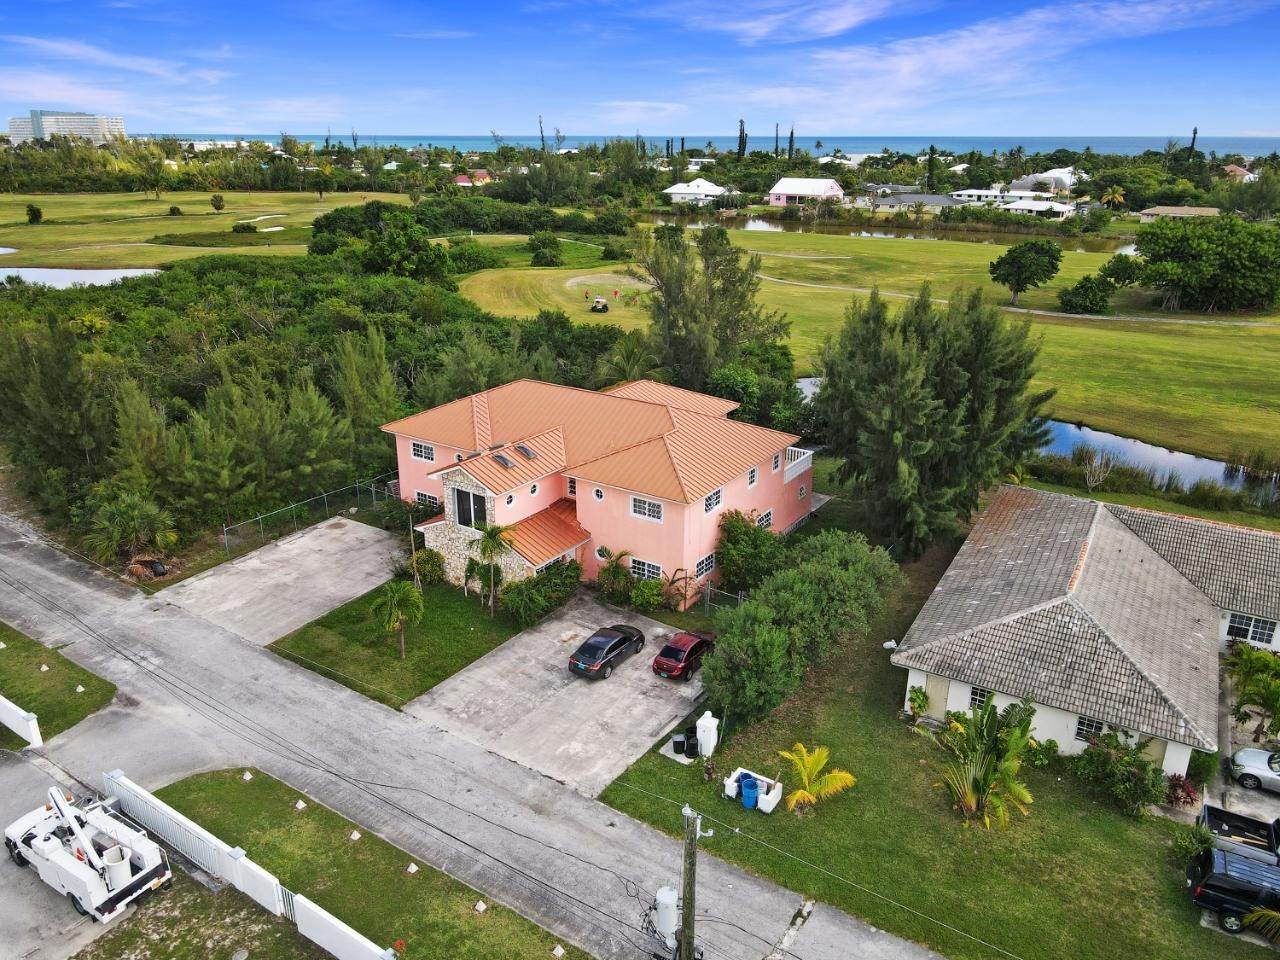 Multi-Family Homes for Sale at Other Bahamas, Other Areas In The Bahamas Bahamas